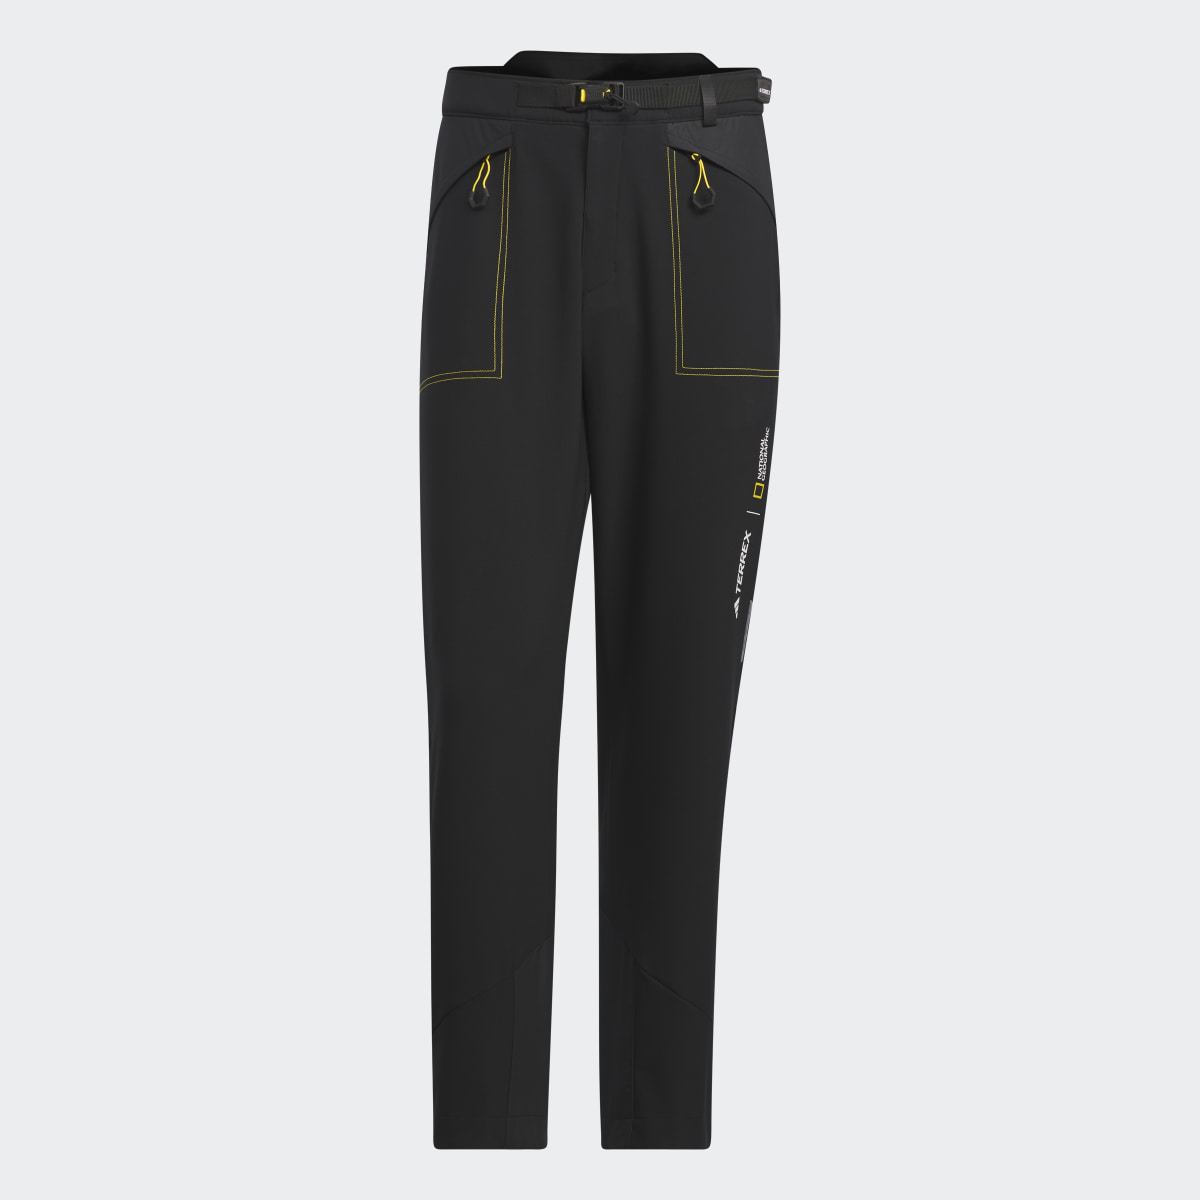 Adidas Pants National Geographic Soft Shell. 4